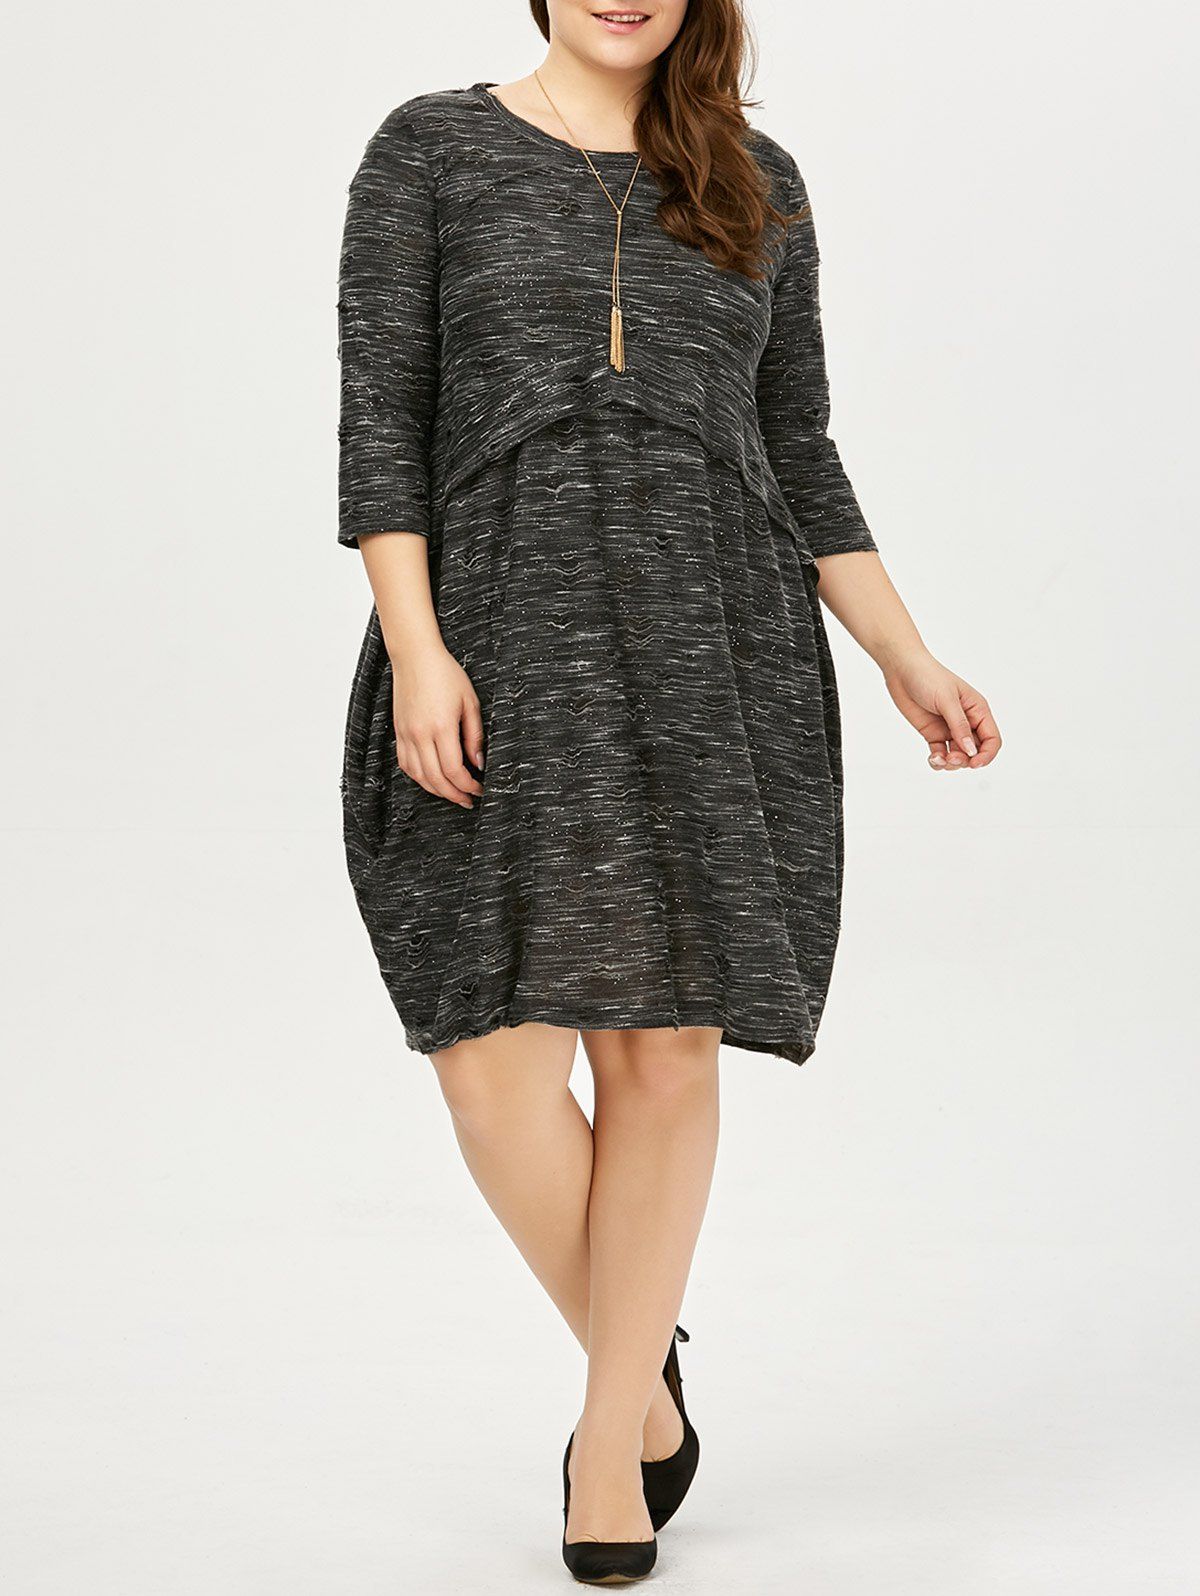 [41% OFF] 2021 Knee Length Plus Size Casual Dress In GRAY | DressLily